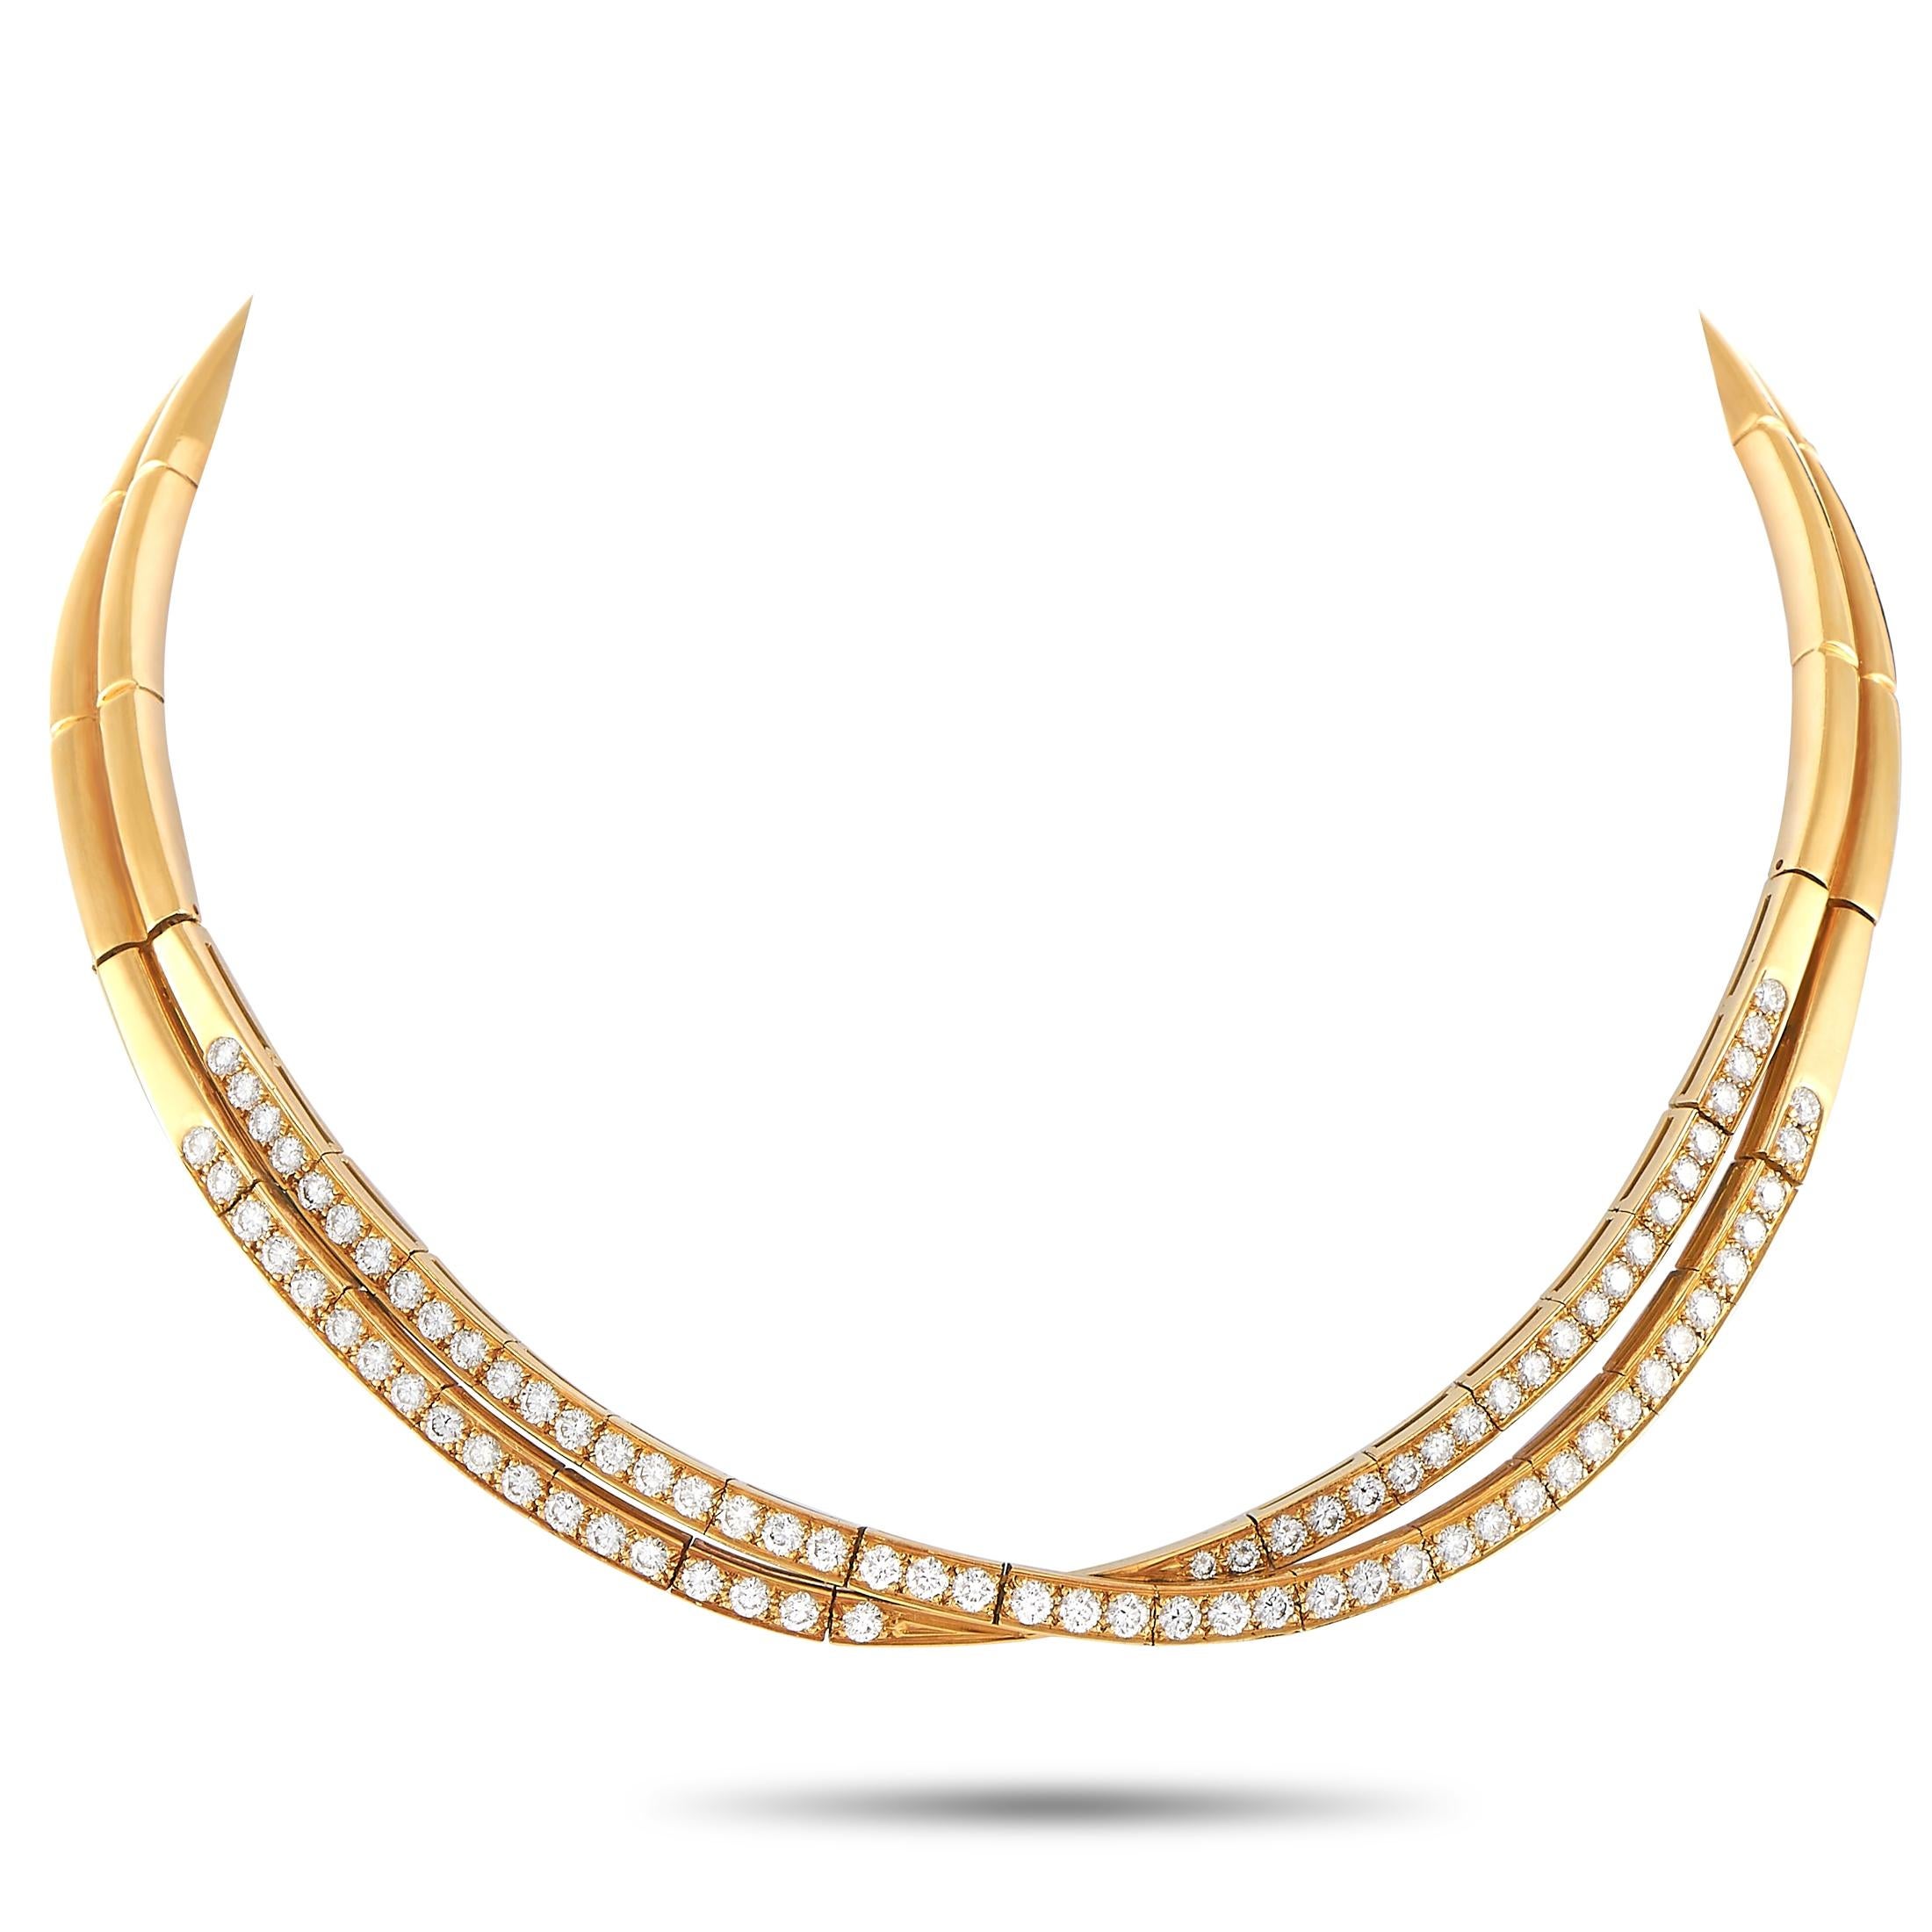 Incorporate this vintage jewel in your day-to-day style and use it as a statement piece that reveals your daring character. This Van Cleef & Arpels 18K Yellow Gold !6.00 ct Diamond Choker Necklace is a close-fitting necklace designed with a split